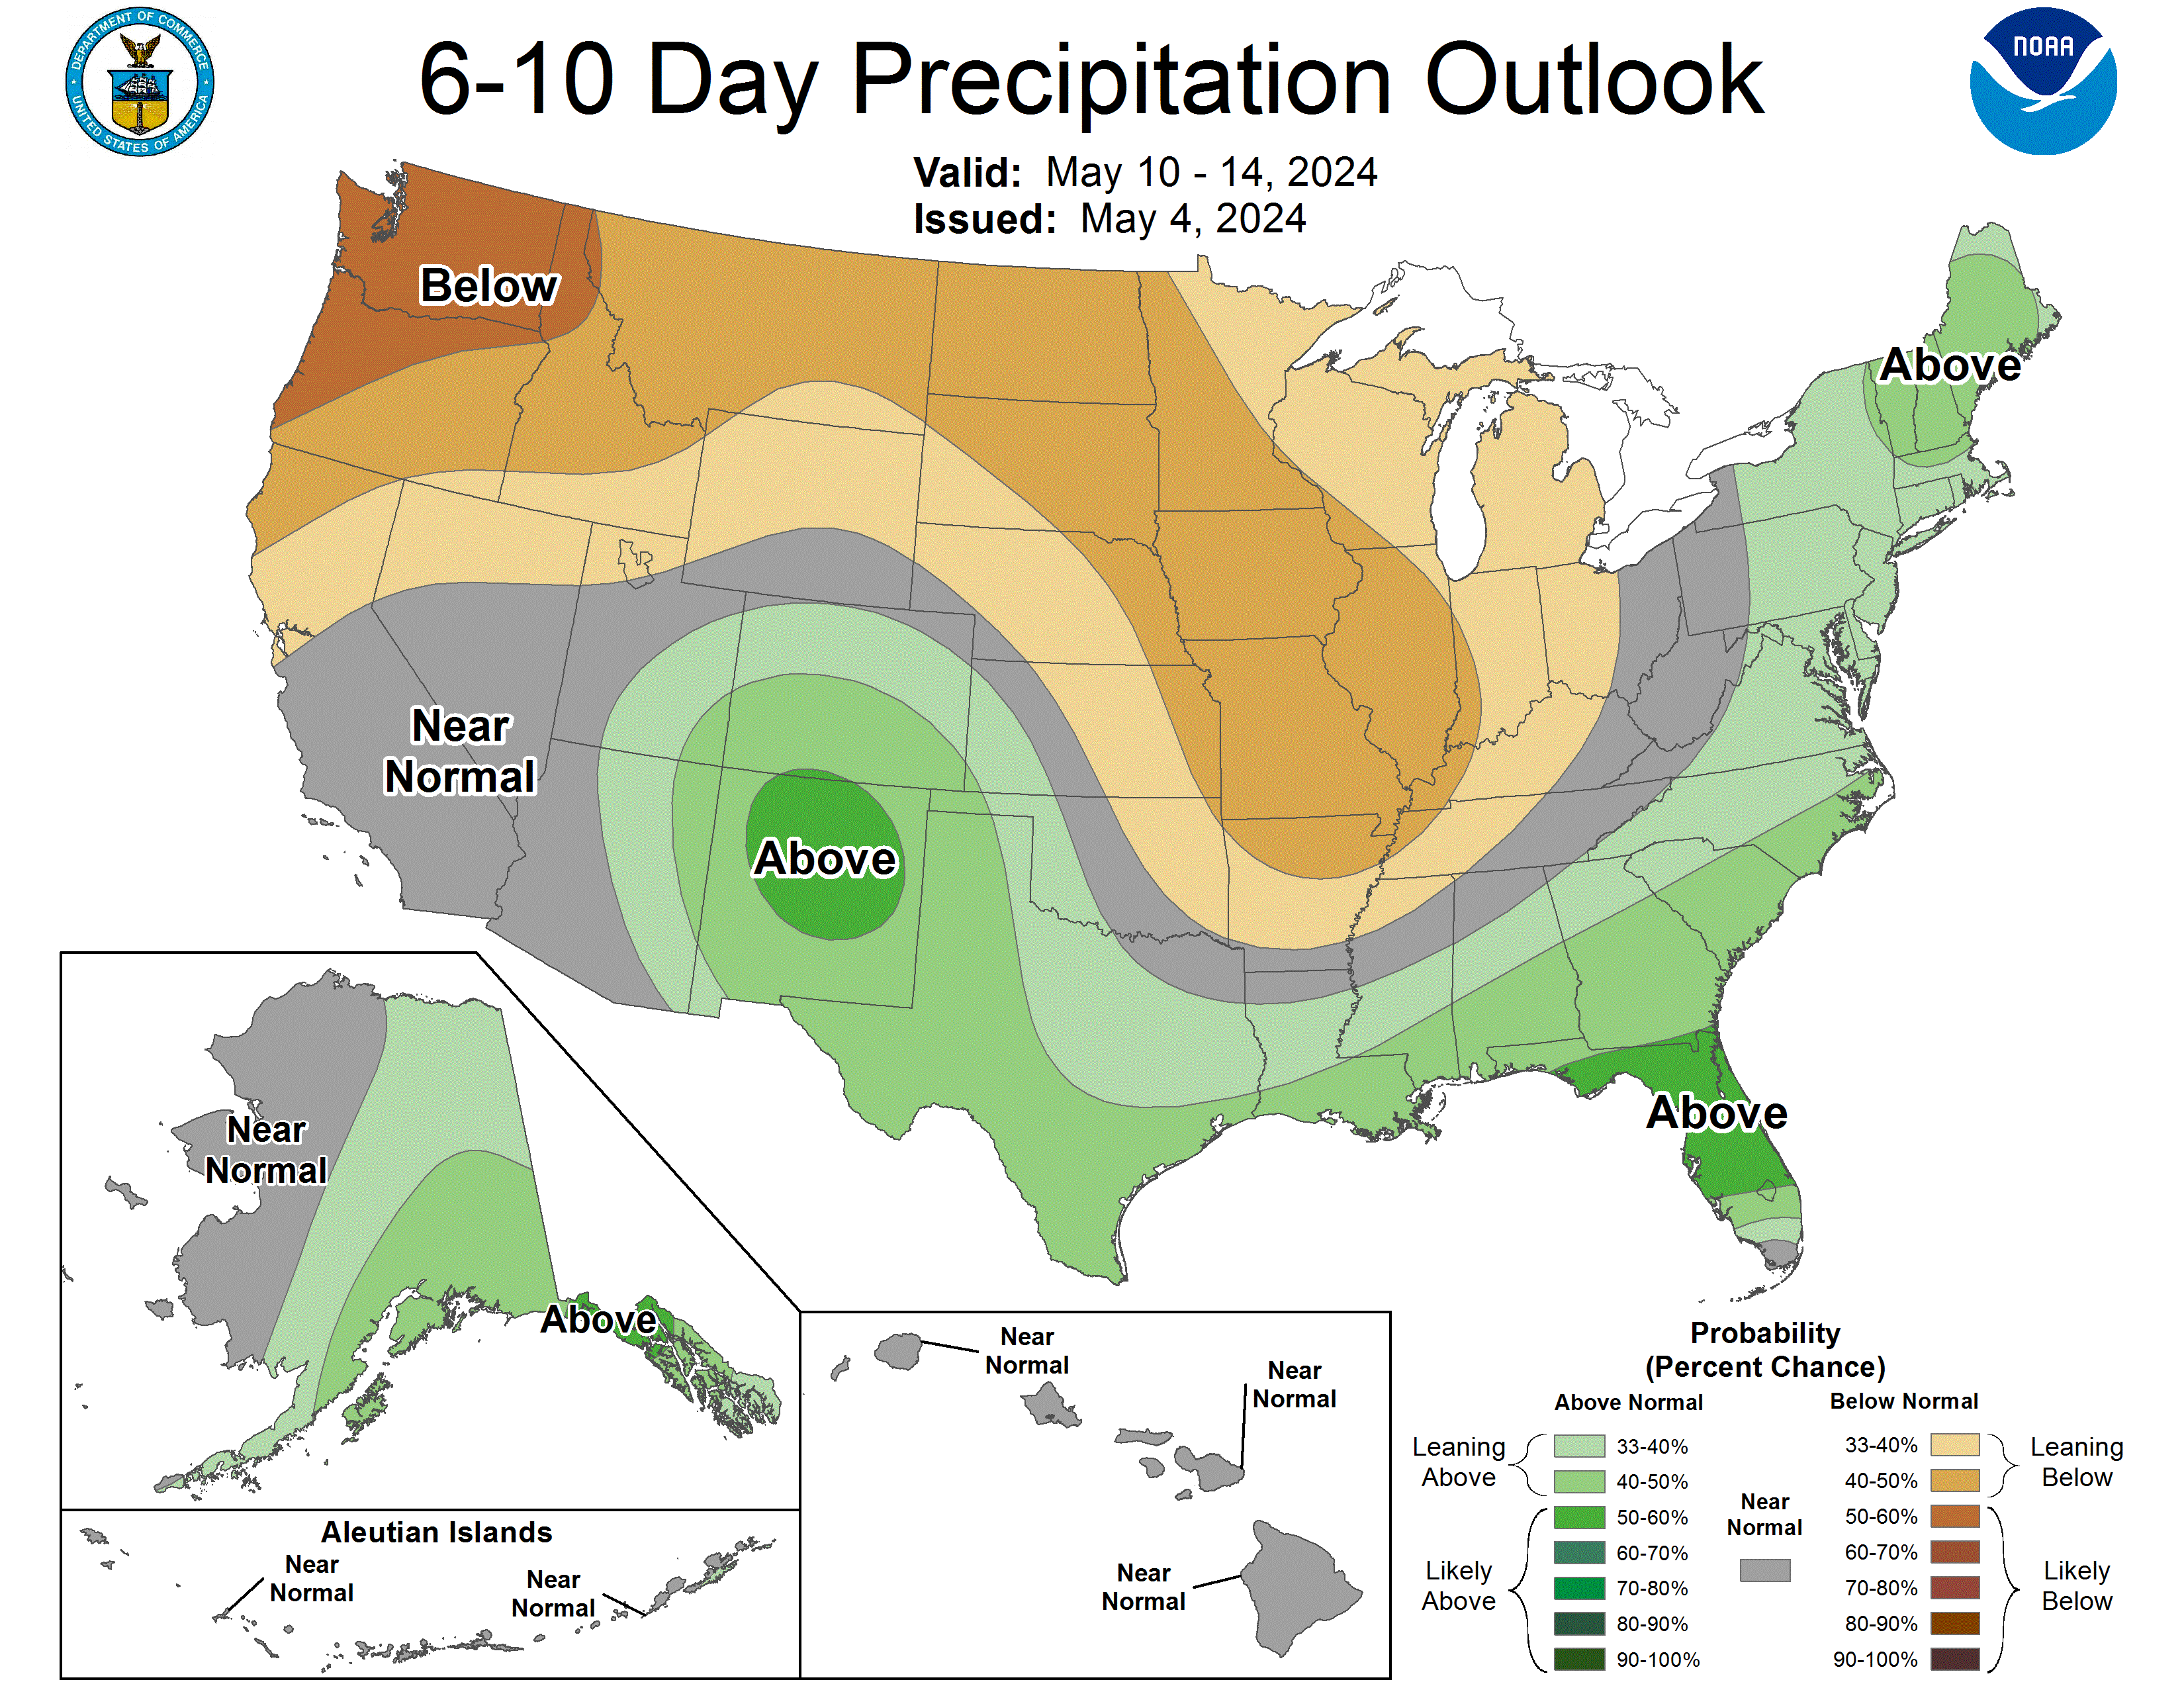 6-10 day precipitation outlook for the US. Image: NOAA Today